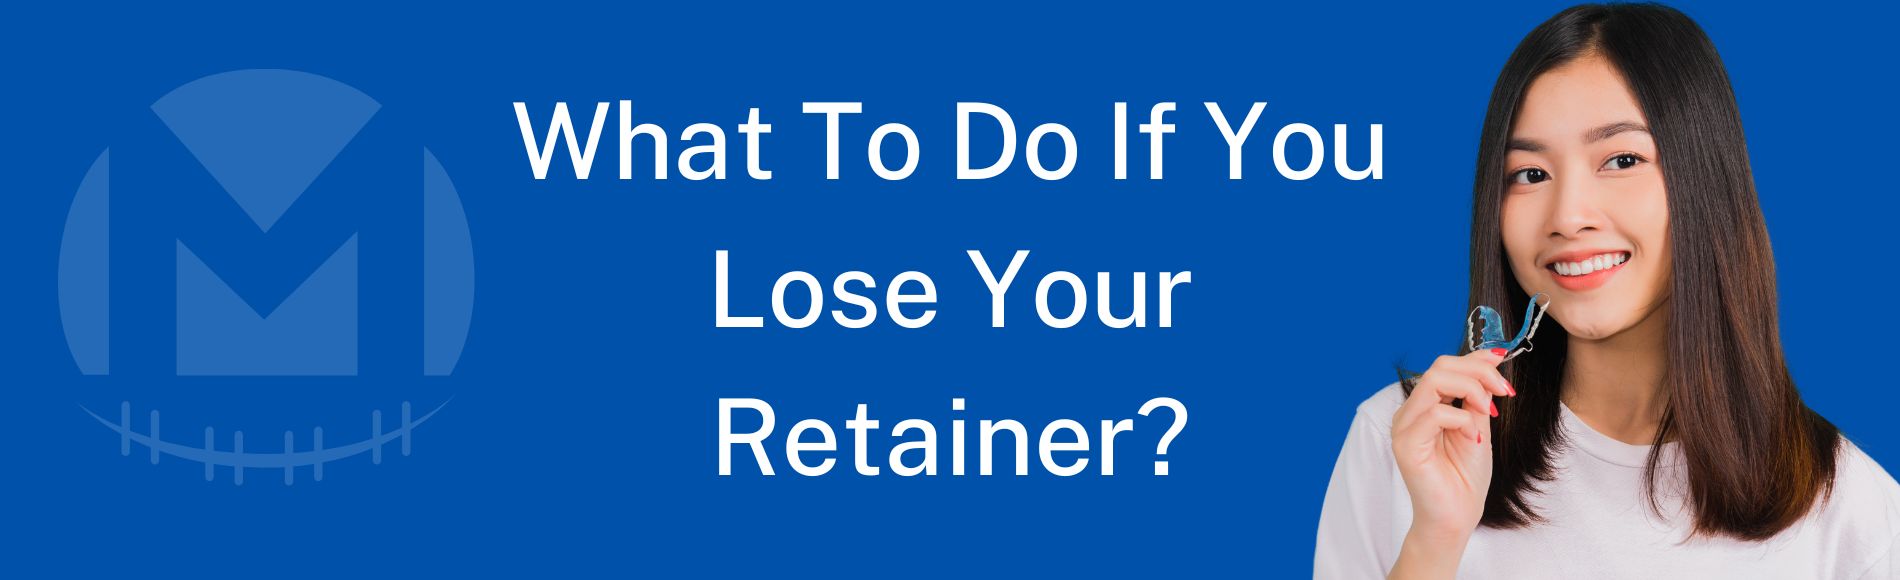 What To Do If You Lose Your Retainer